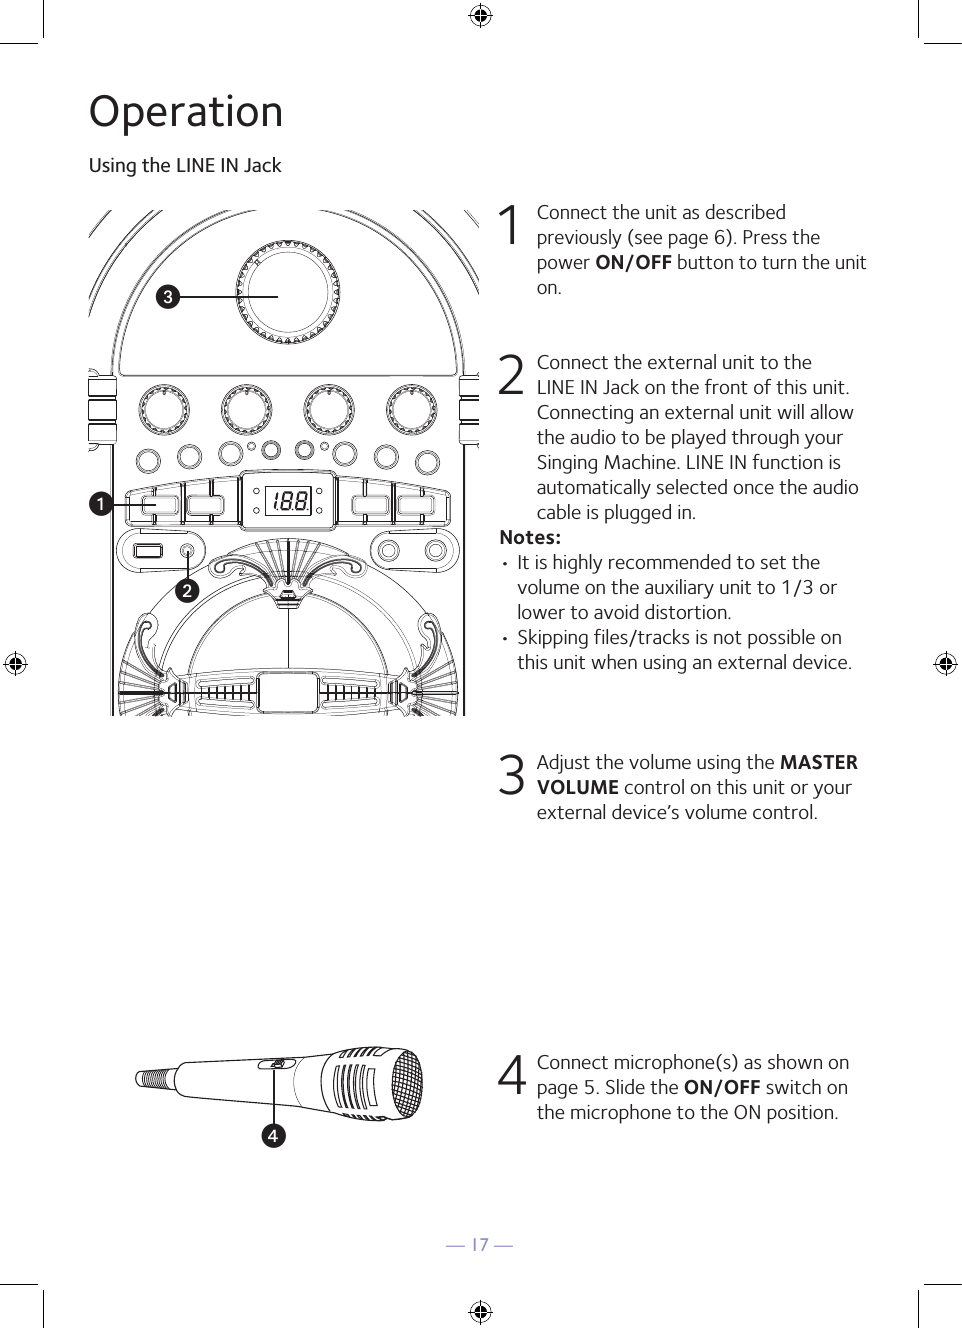 — 17 —OperationUsing the LINE IN Jack1 Connect the unit as described previously (see page 6). Press the power ON/OFF button to turn the unit on. 2   Connect the external unit to the LINE IN Jack on the front of this unit. Connecting an external unit will allow the audio to be played through your Singing Machine. LINE IN function is automatically selected once the audio cable is plugged in.Notes:• It is highly recommended to set the volume on the auxiliary unit to 1/3 or lower to avoid distortion.• Skipping files/tracks is not possible on this unit when using an external device.3 Adjust the volume using the MASTER VOLUME control on this unit or your external device’s volume control.4 Connect microphone(s) as shown on page 5. Slide the ON/OFF switch on the microphone to the ON position.vwxu